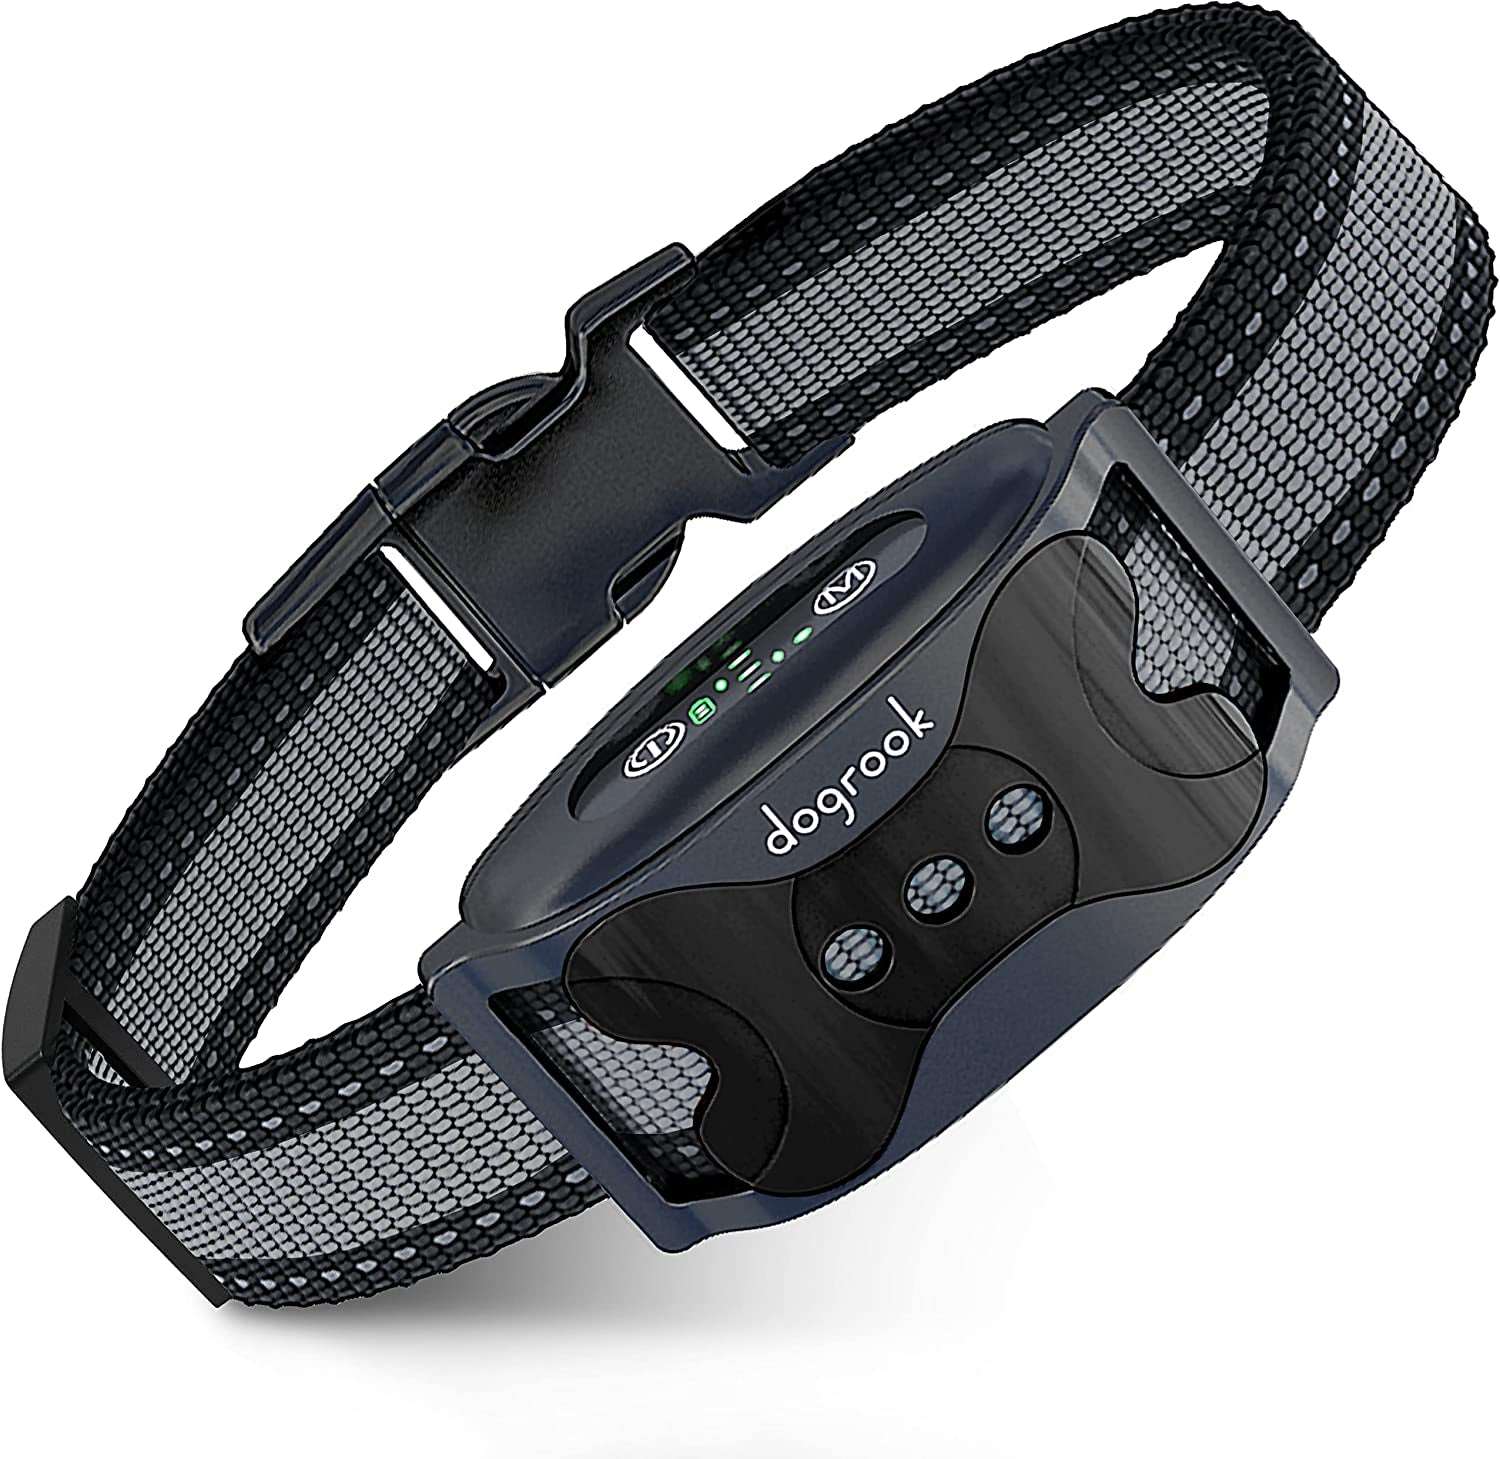  Rechargeable Smart anti Barking Collar for Dogs 